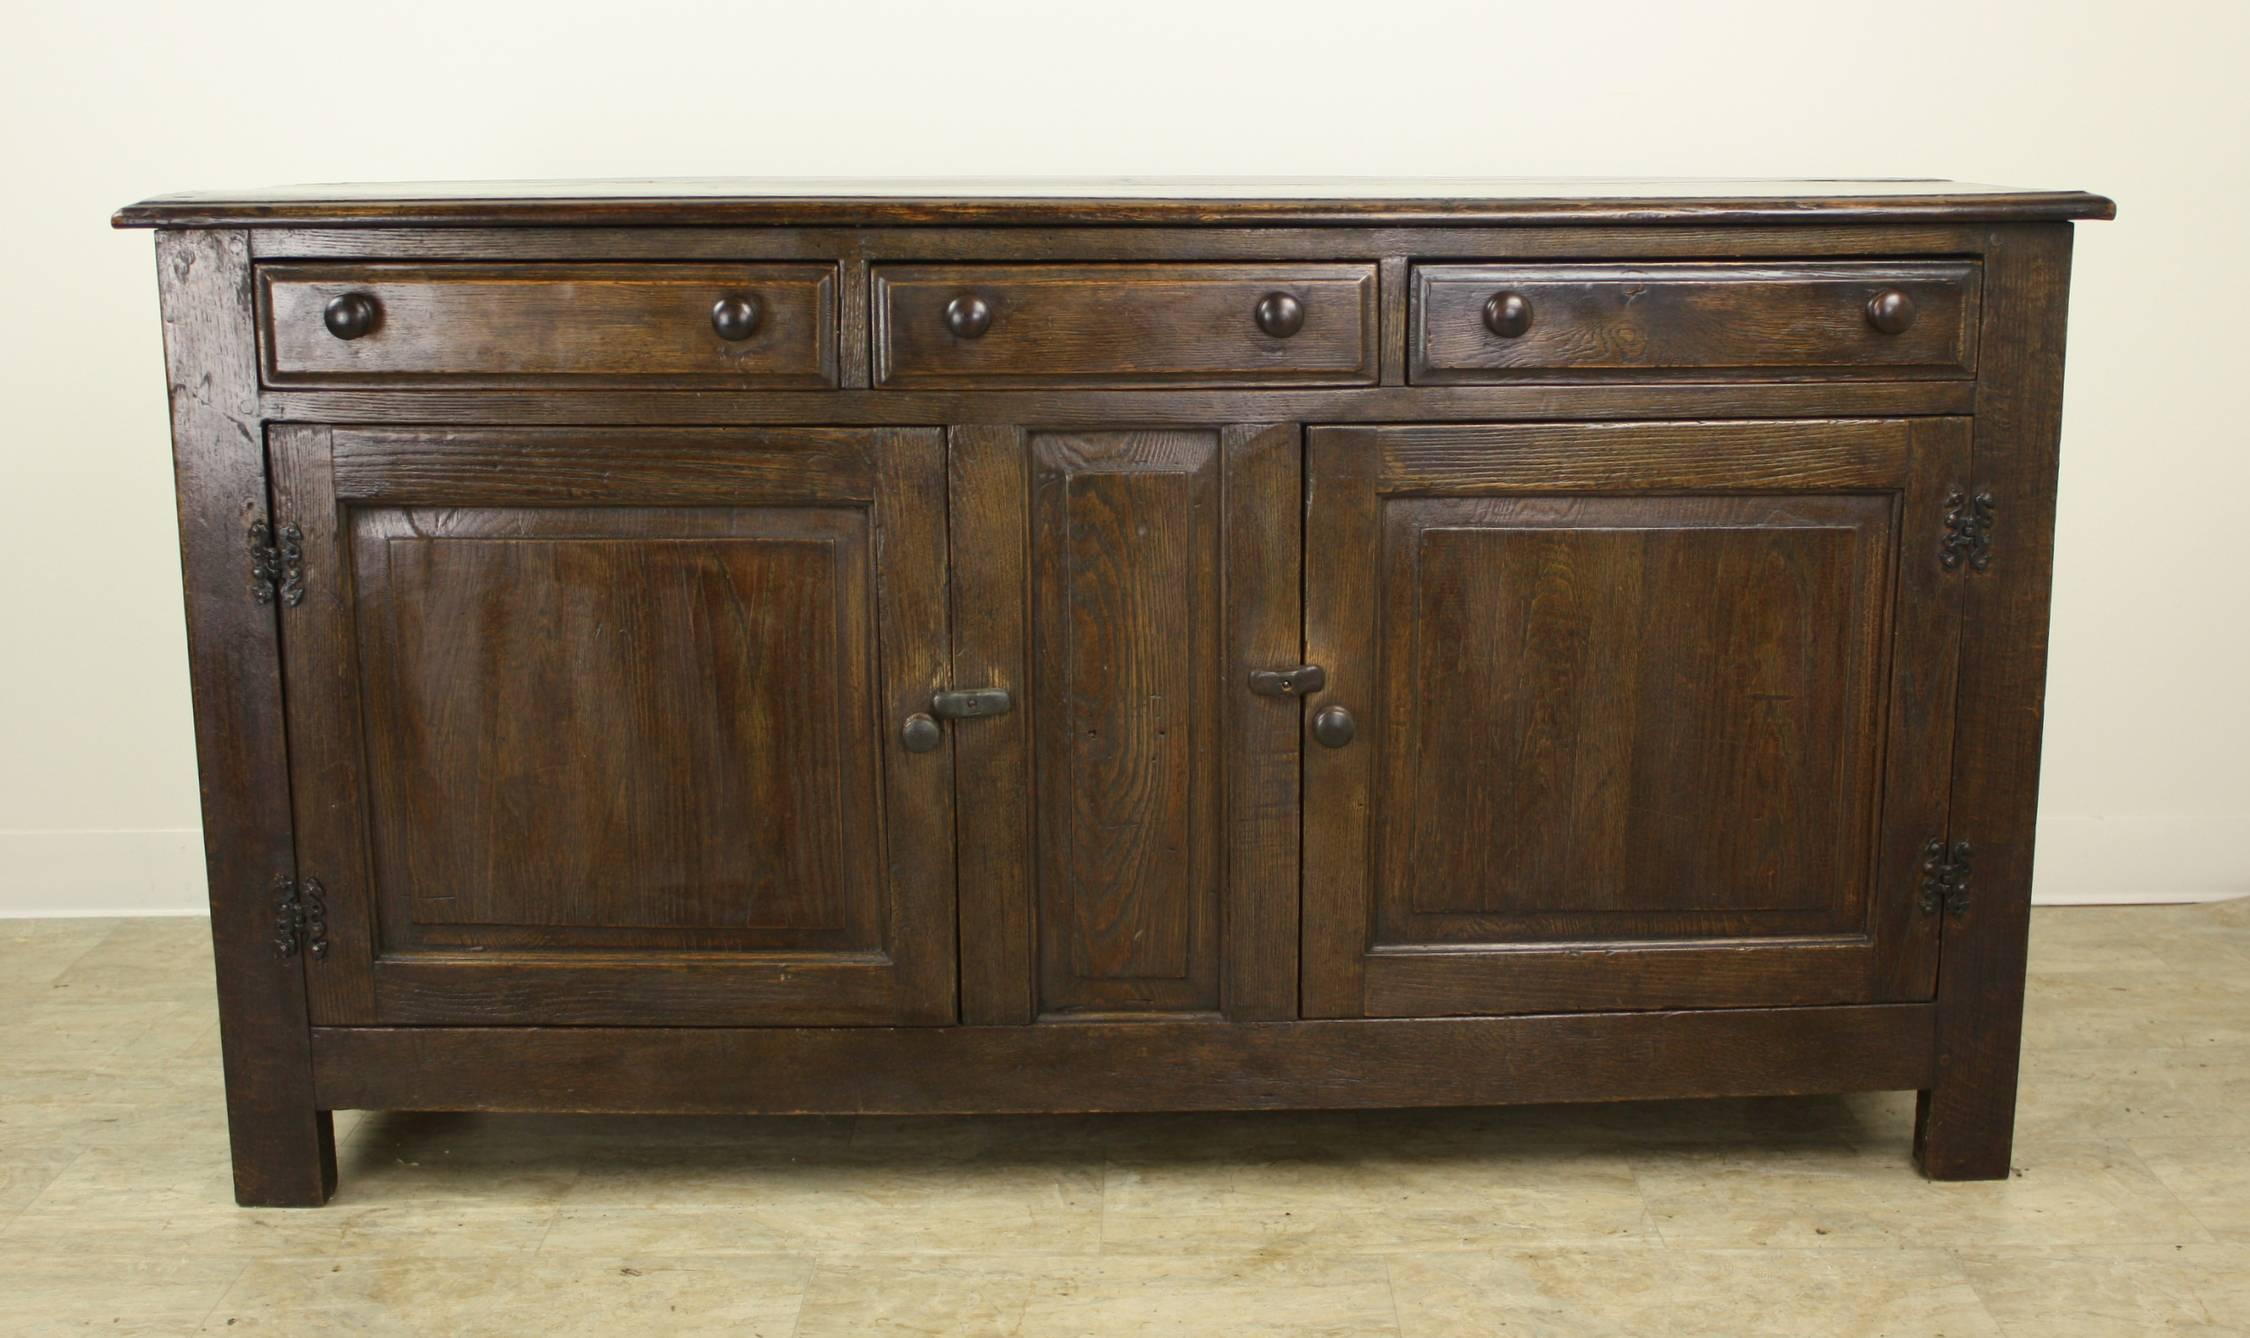 A handsome dark oak server, sideboard or buffet from Wales. The piece has lovely color and is in wonderful antique condition! Latch closures on front doors give a rustic look and close snugly. Interior shelves are not adjustable.